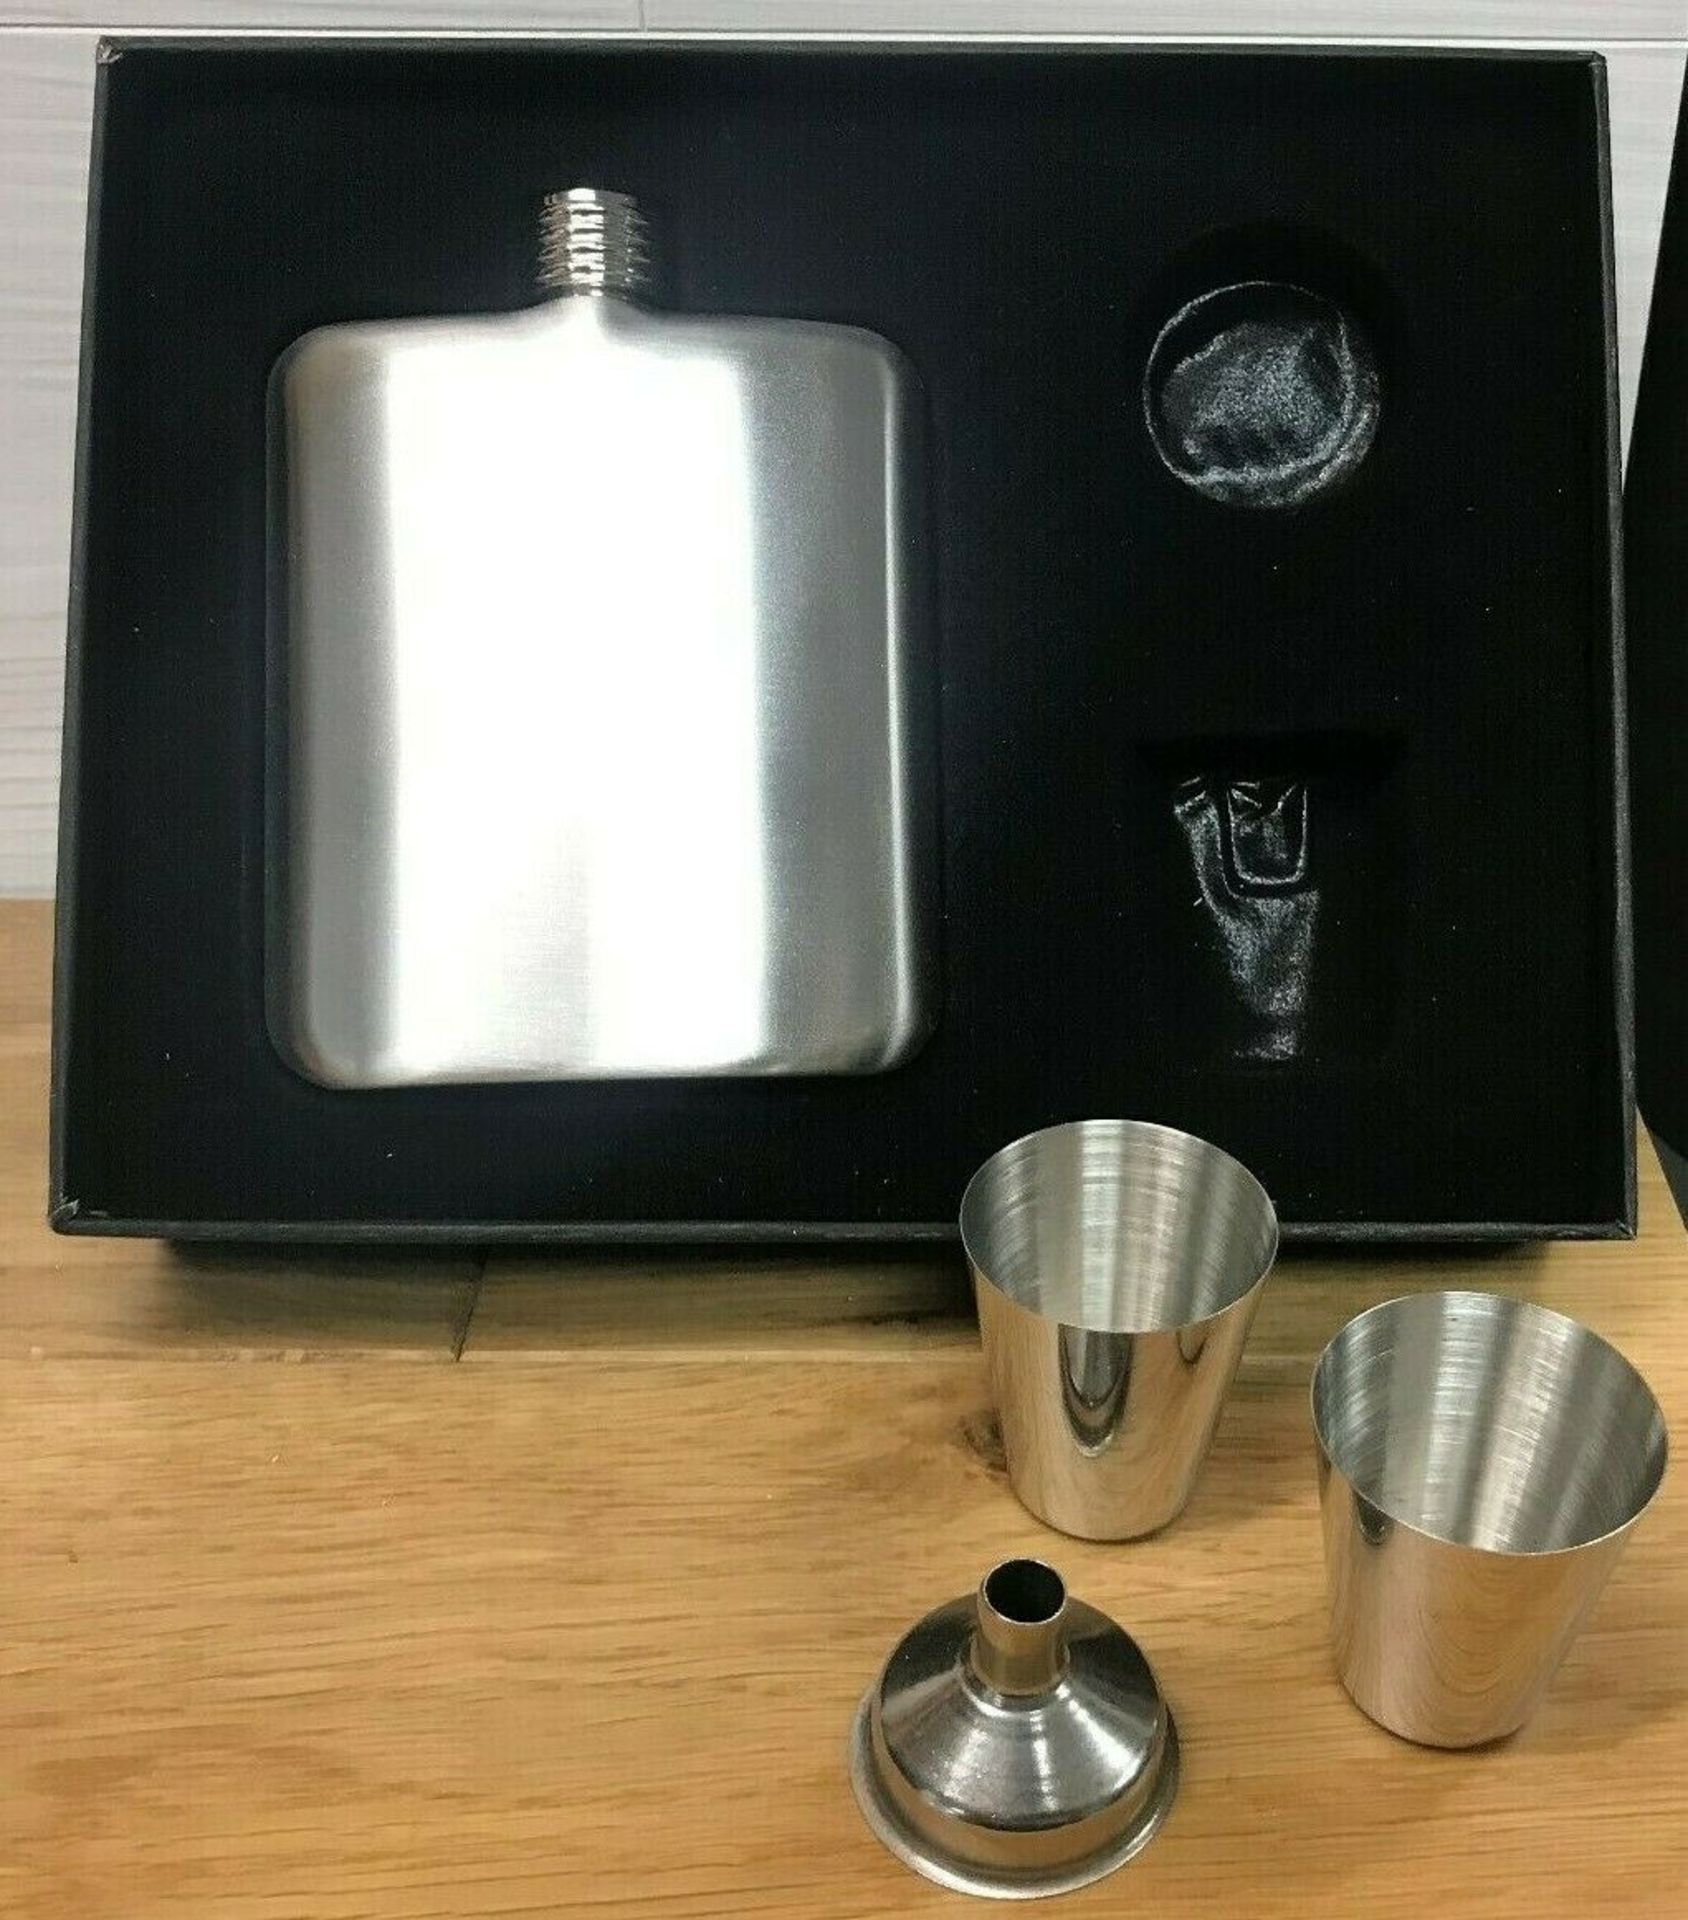 Boxed 6Oz Stainless Steel Hip Flask, Funnel / Pourer plus 2 Shot Cups - 25 Sets Total RRP £312.50 - Image 3 of 5